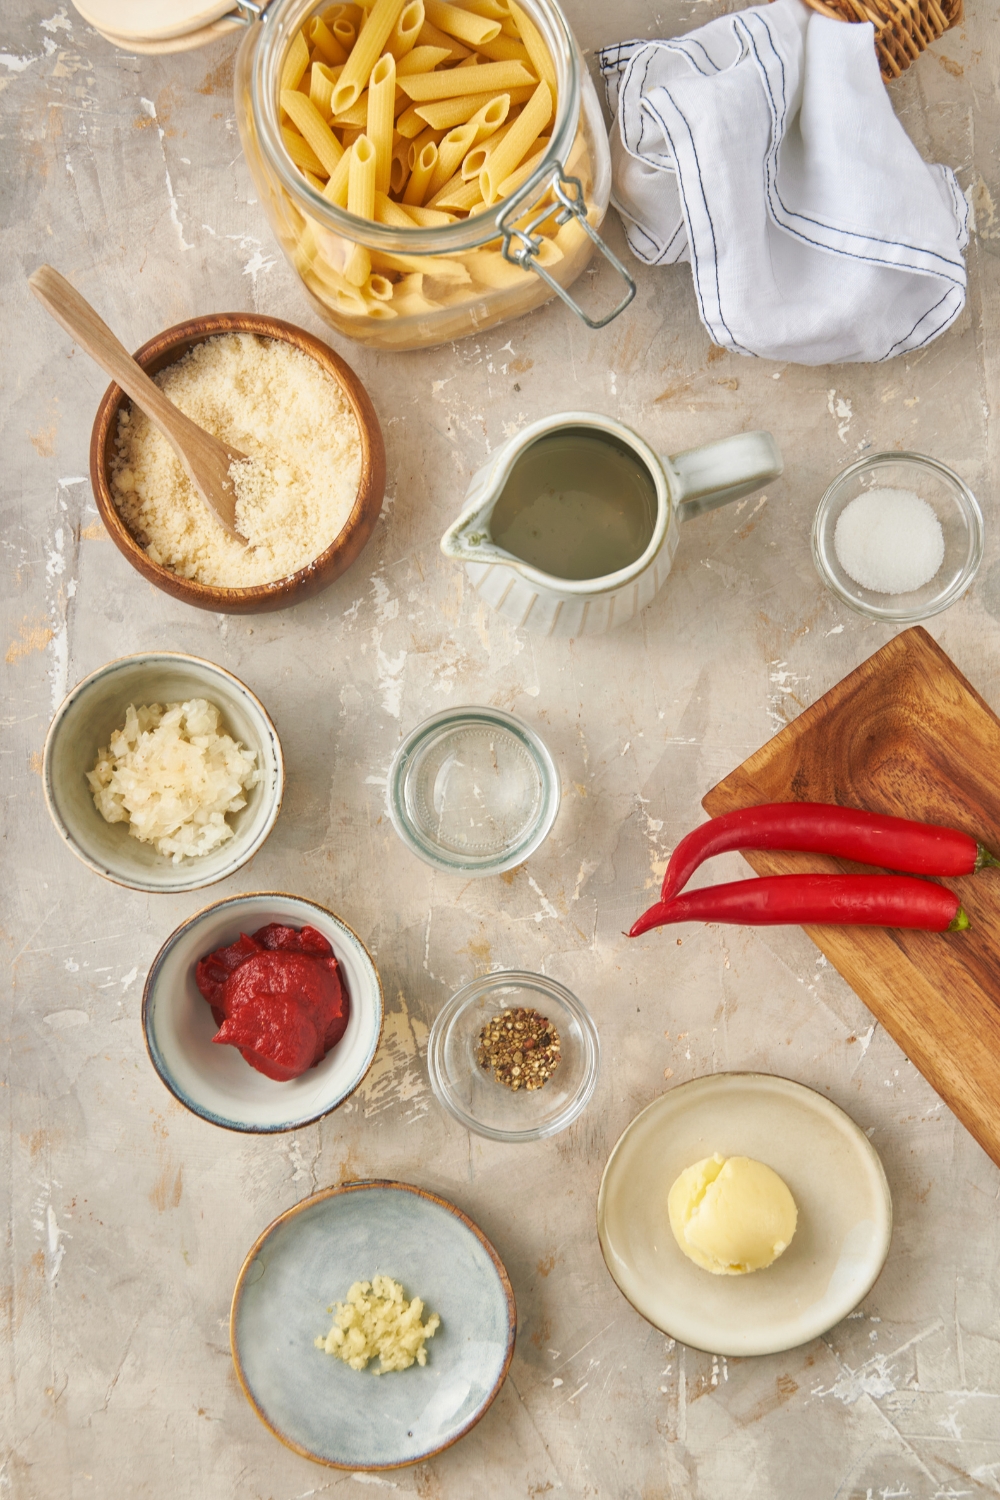 Overhead view of an assortment of ingredients including bowls of parmesan cheese, diced onion, tomato paste, a pitcher of vodka, two red chili peppers, a jar of dried pasta, a plate of minced garlic, and a plate of butter.